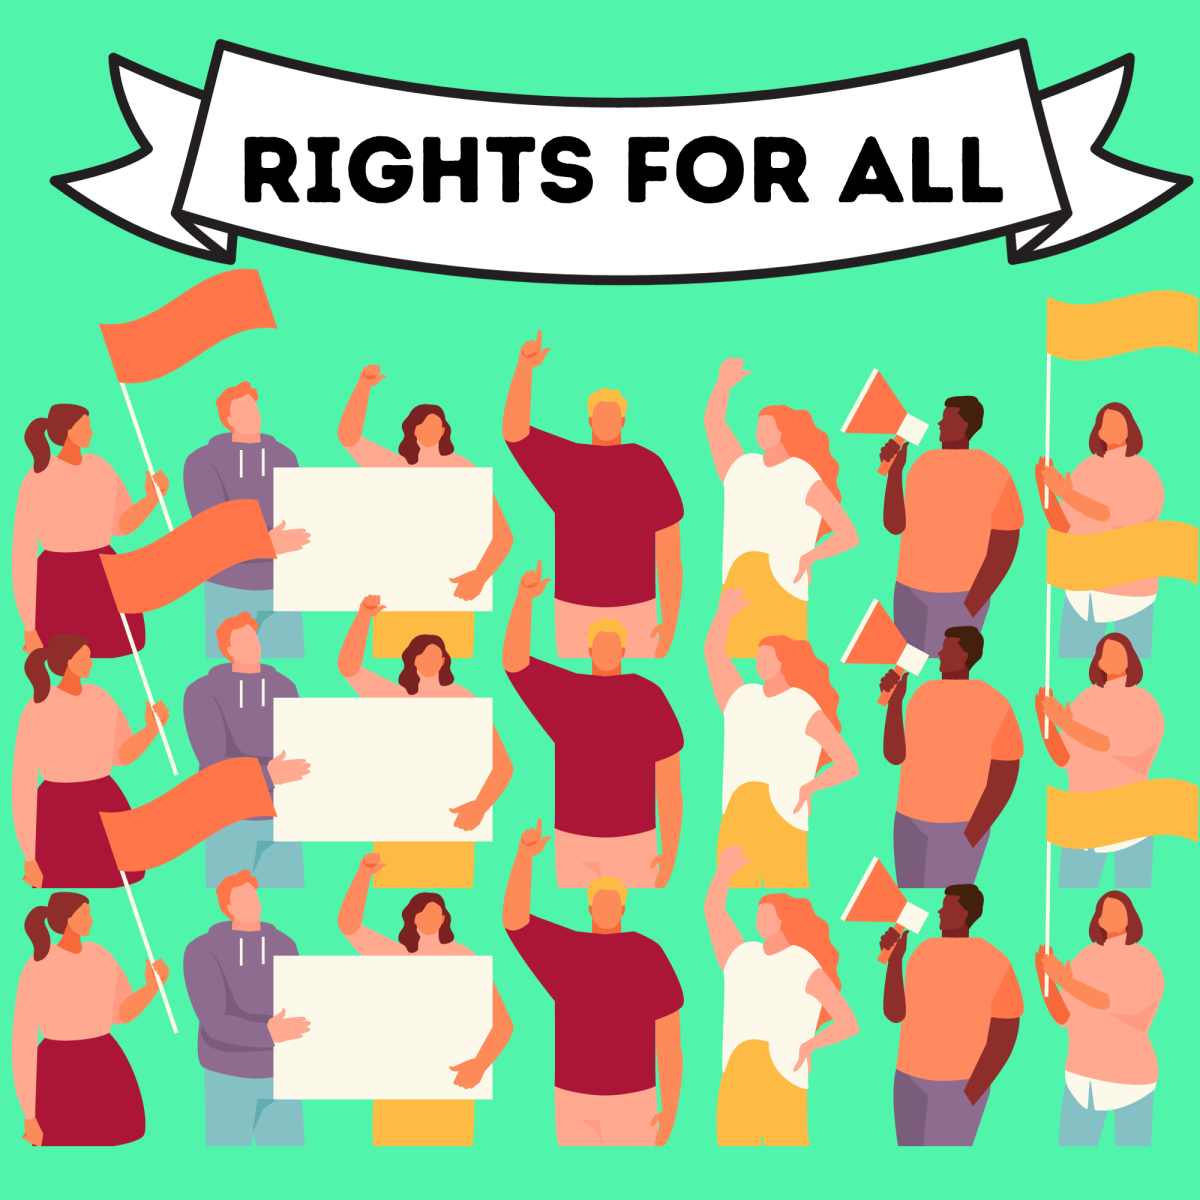 Strikes and the rights of workers are important ways to ensure the civil rights of citizens. The Hollywood strikes this year show us exactly what that looks like.

- Made in Canva